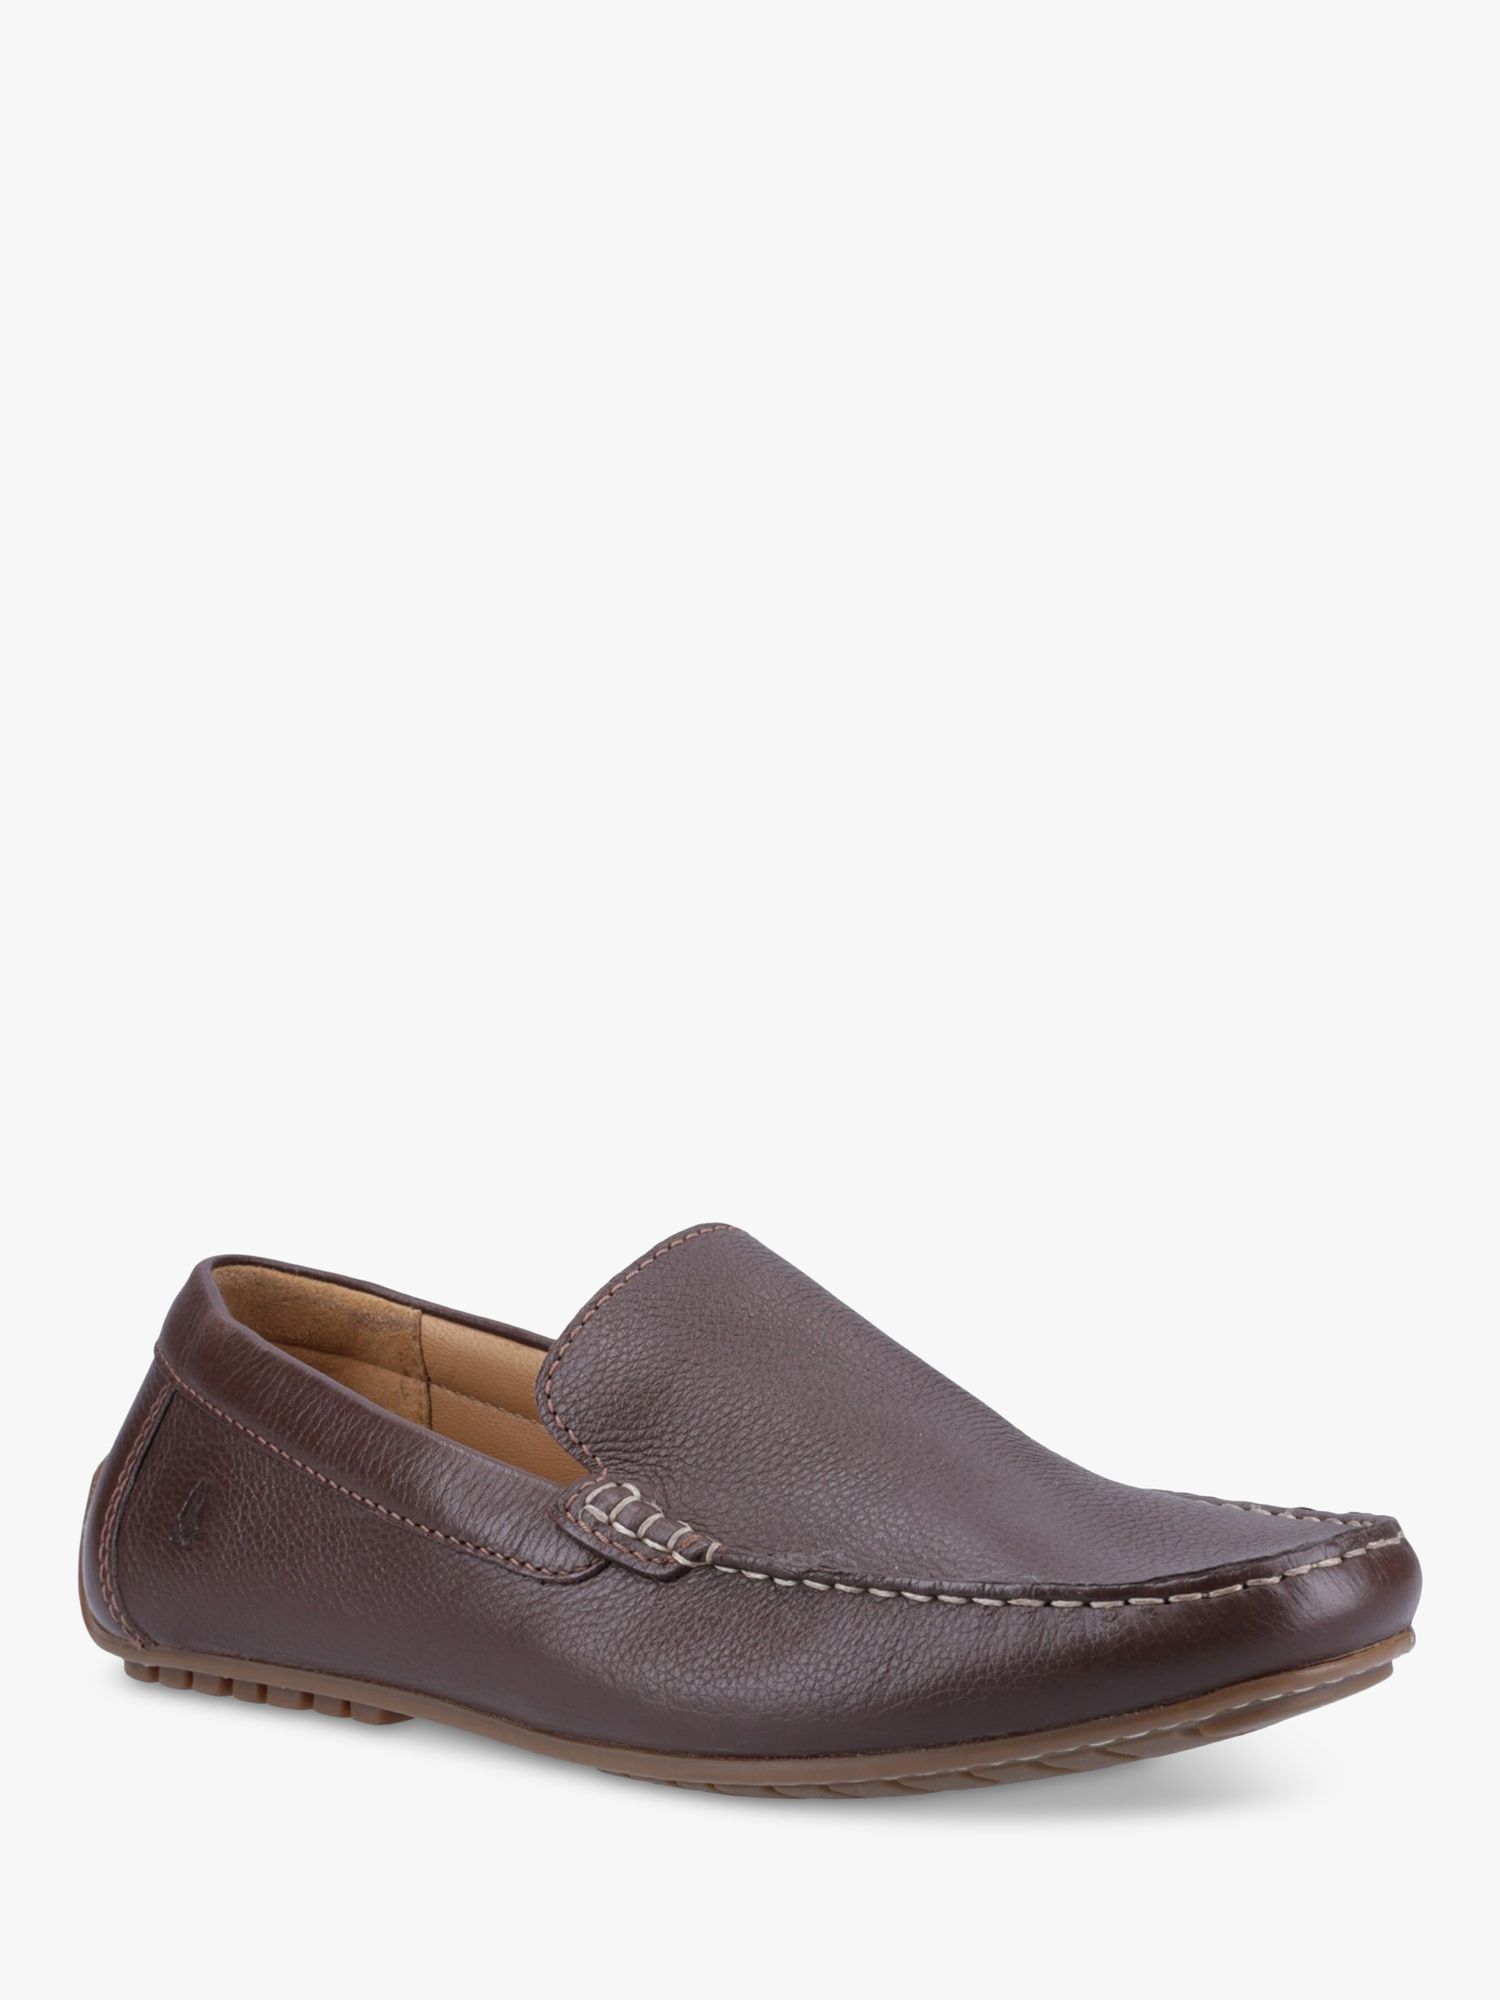 Hush Puppies Ralph Leather Slip On Loafers, Brown, 6